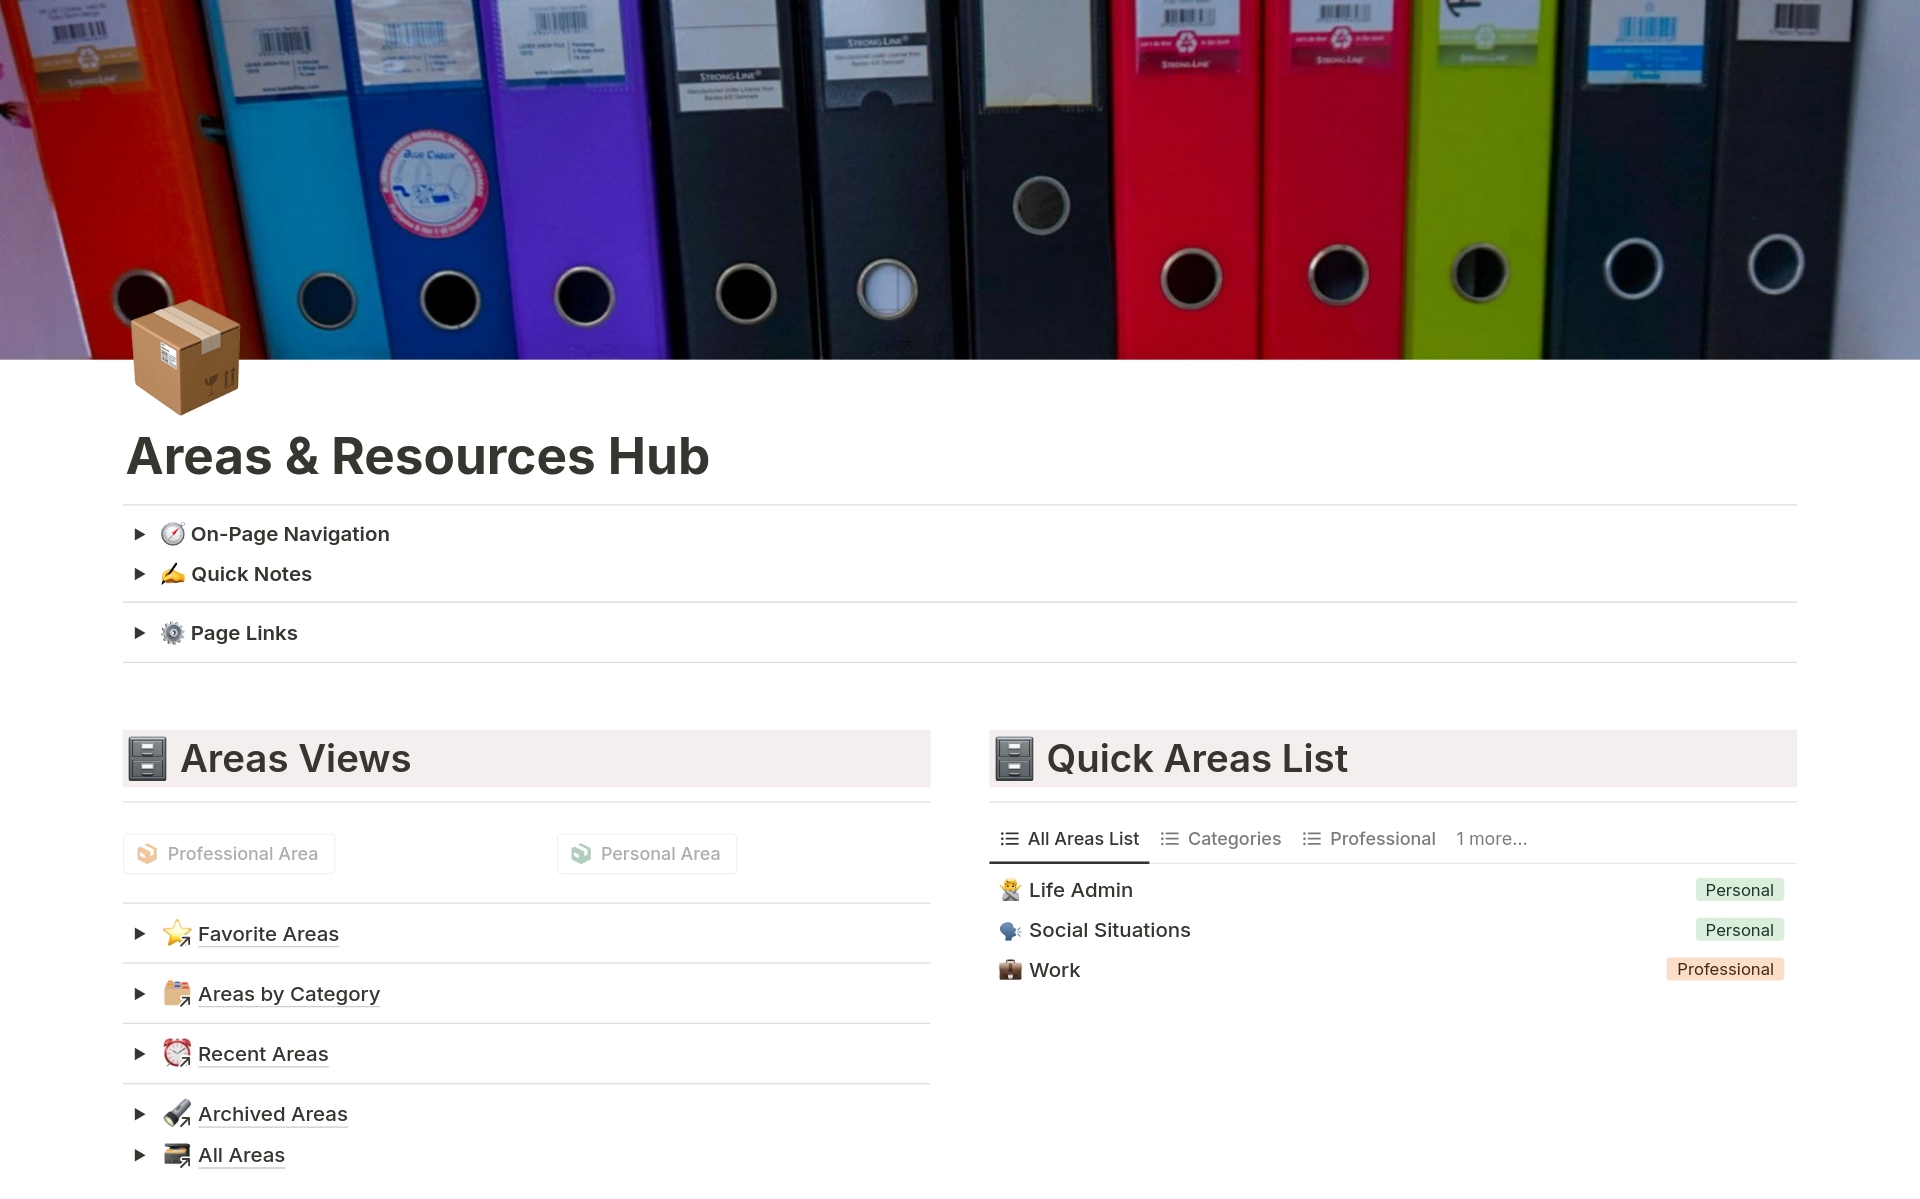 Organize every aspect of your life in a neat, digital file cabinet format with the 📦 Areas & Resources Hub. From work, to home, to hobbies, keep all of your documents, notes, and tools neatly categorized and ready to use.